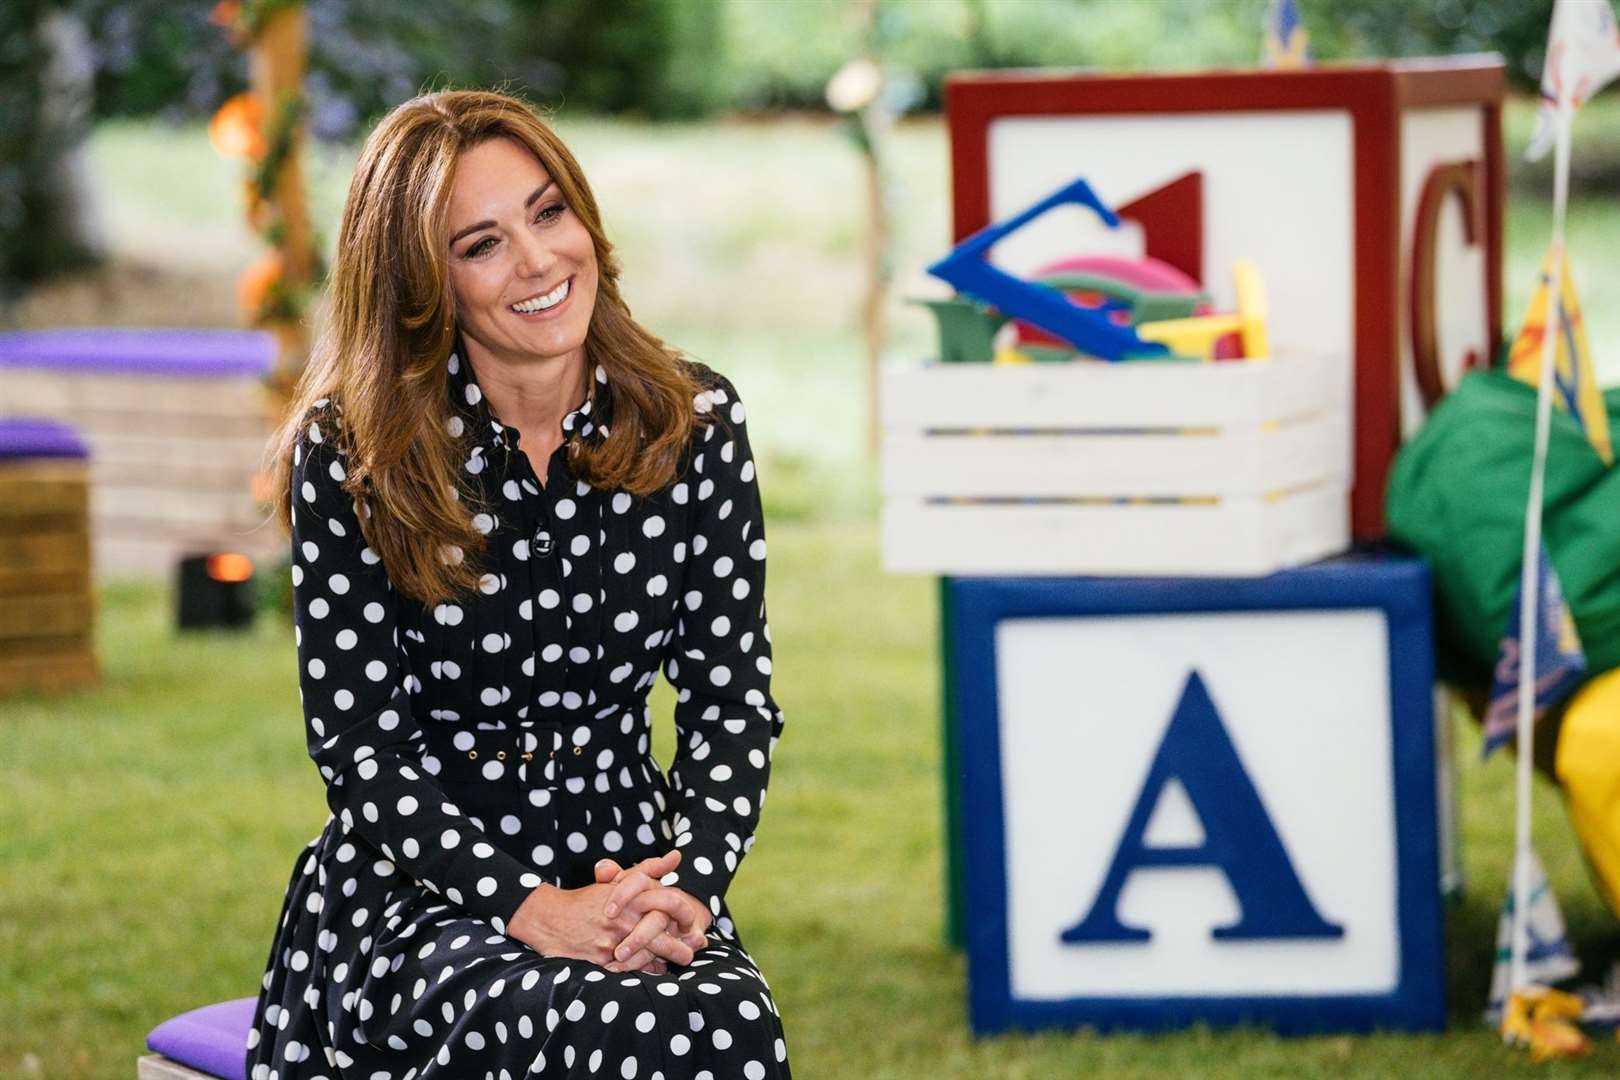 The Tiny Happy People project was launched with support from Duchess of Cambridge Kate Middleton